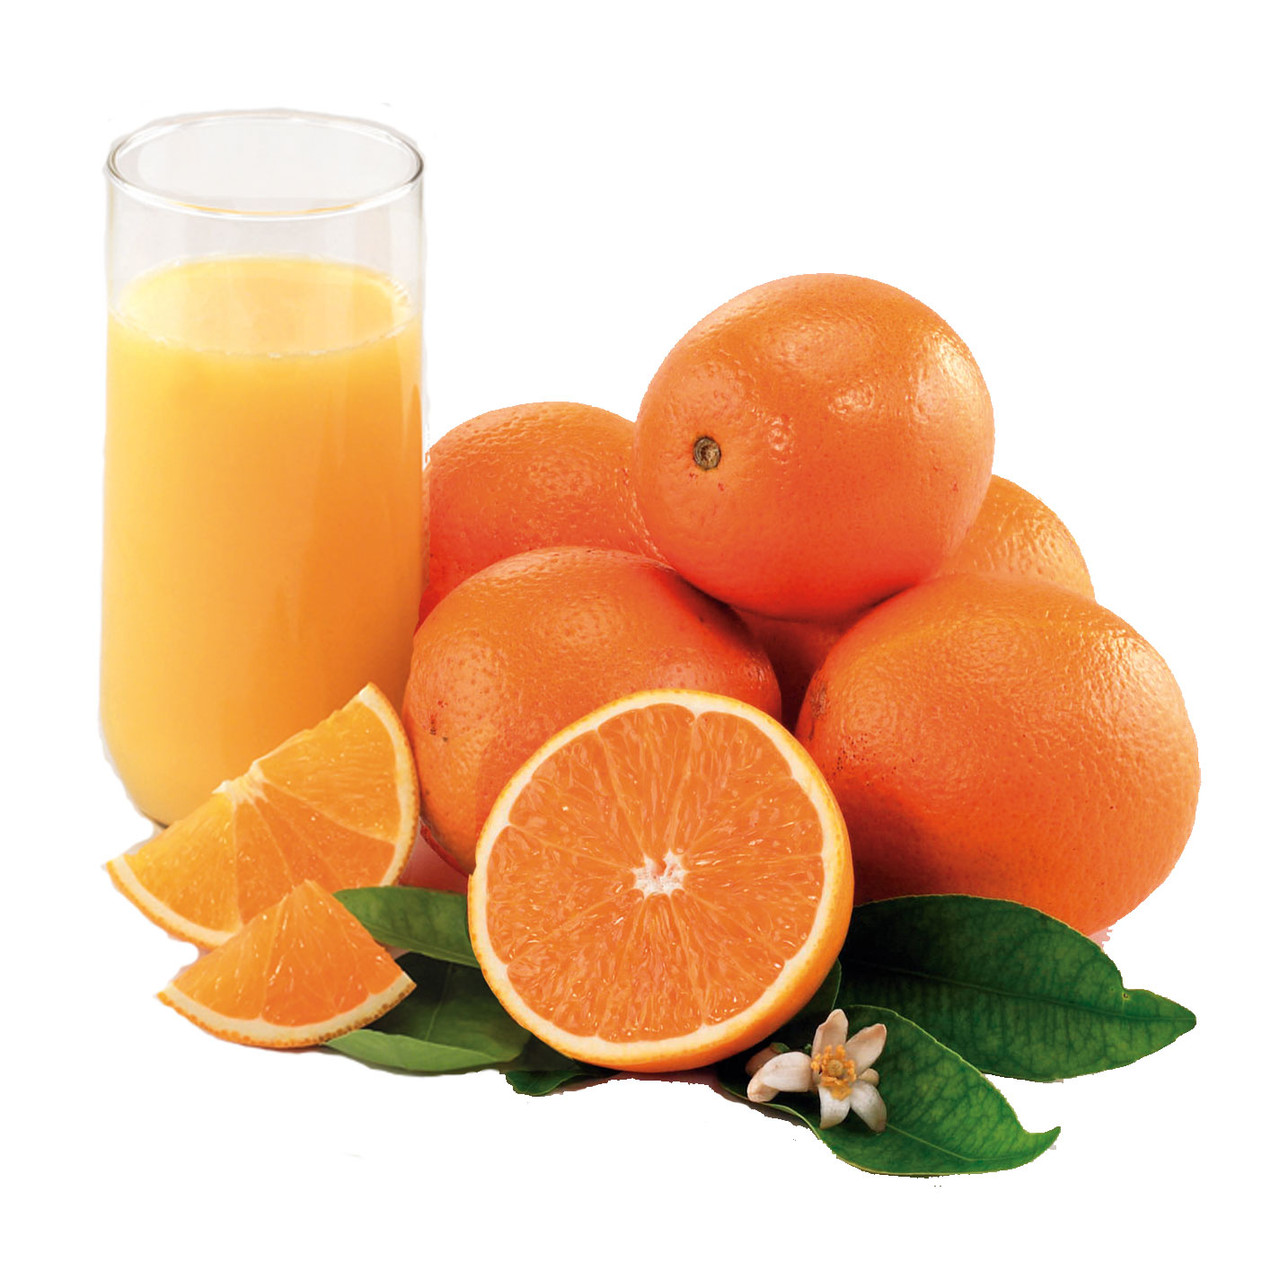 Valencia Oranges Information and Facts